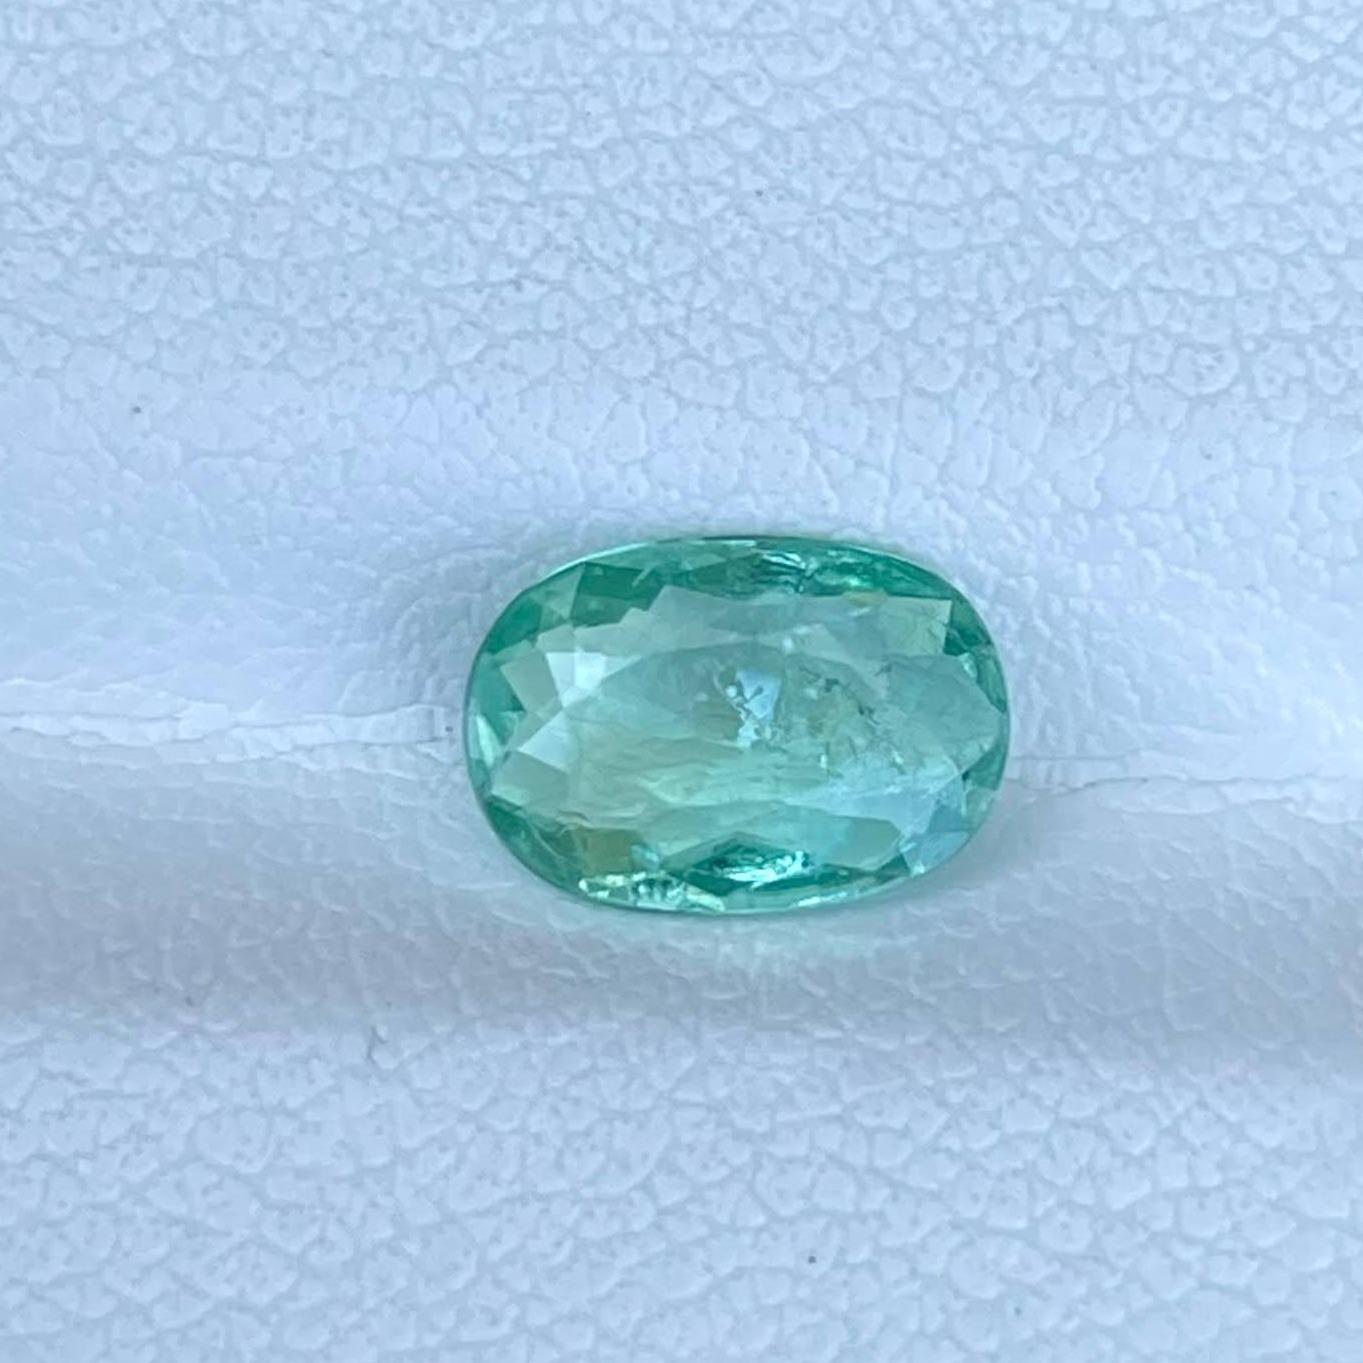 Women's or Men's 1.01 carats Paraiba Loose Tourmaline Oval Cut Natural Gemstone from Mozambique